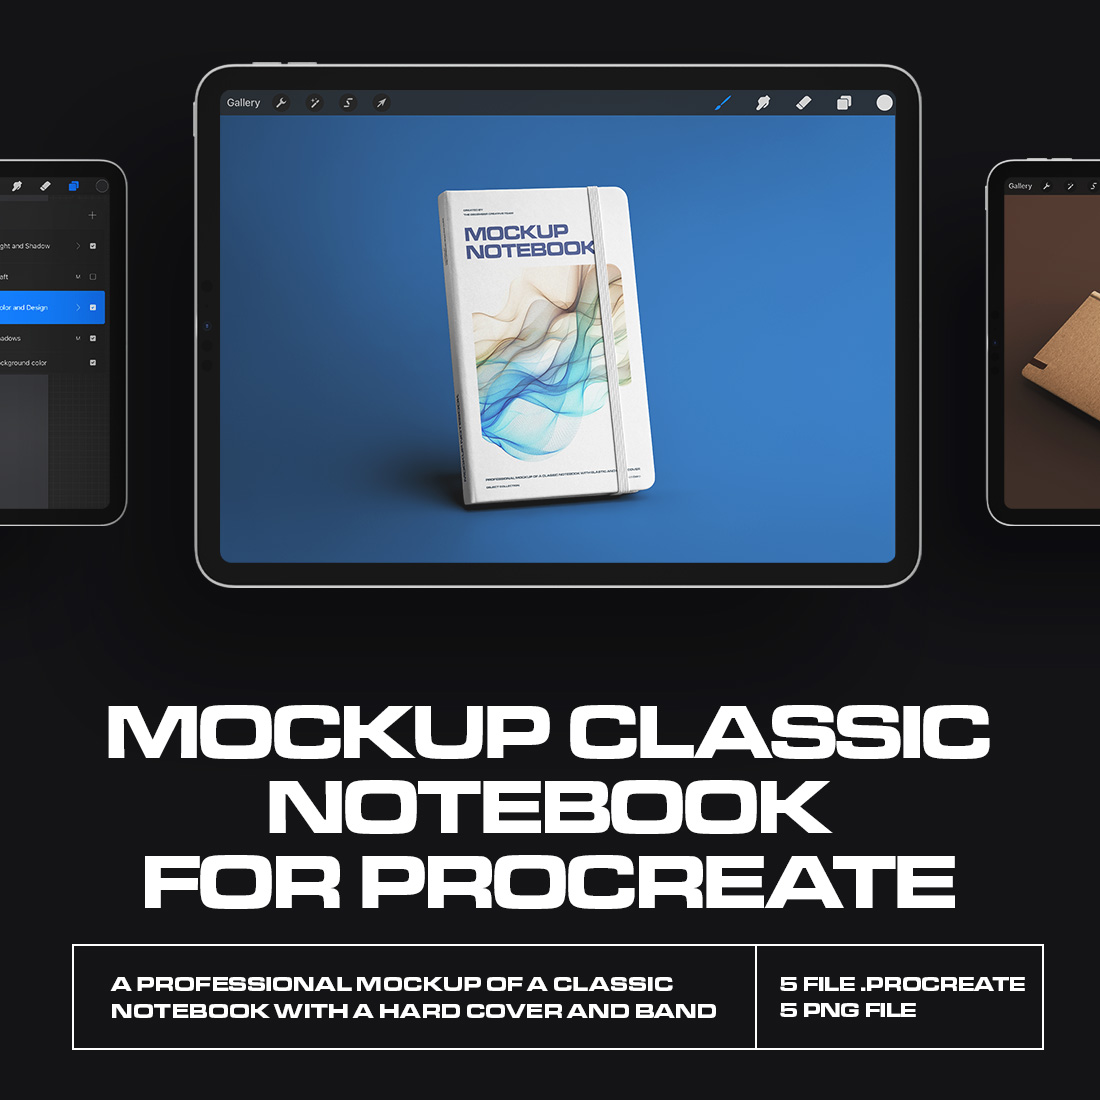 5 Mockups of Classic Notebook with Band and Hard Cover for Procreate on iPad cover image.